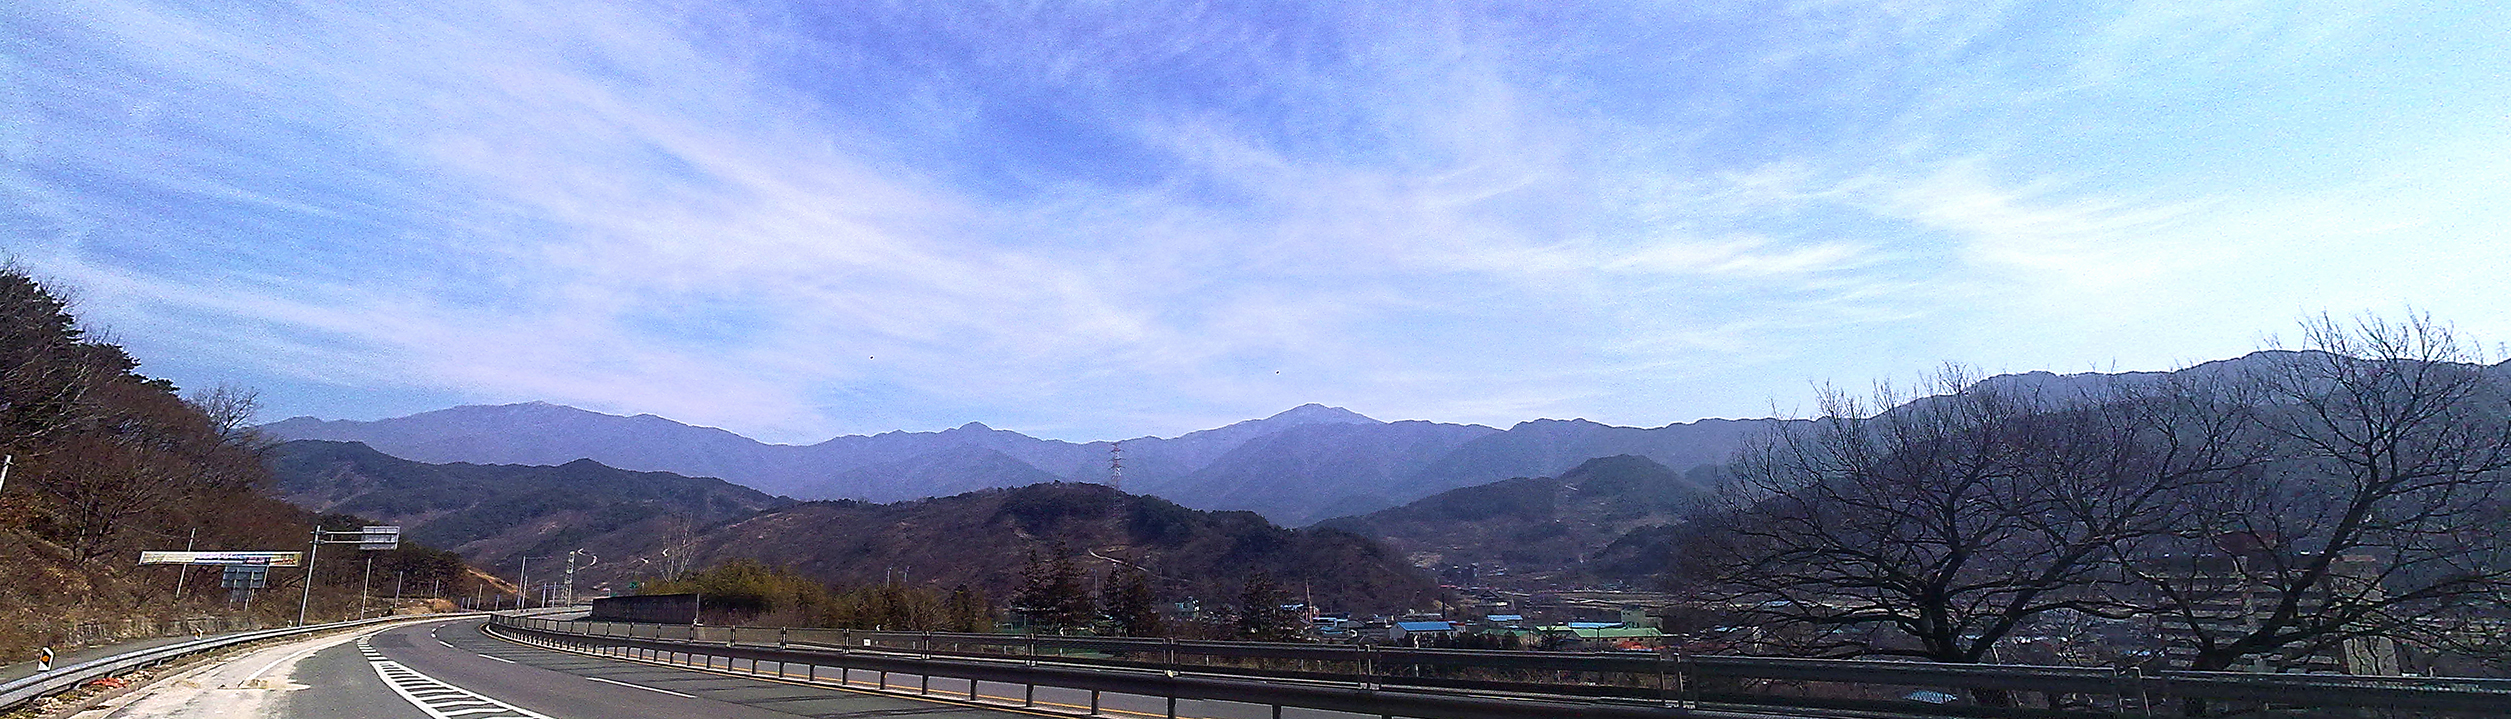 Entering the province Jeollanam-do (전라남도) through the montains